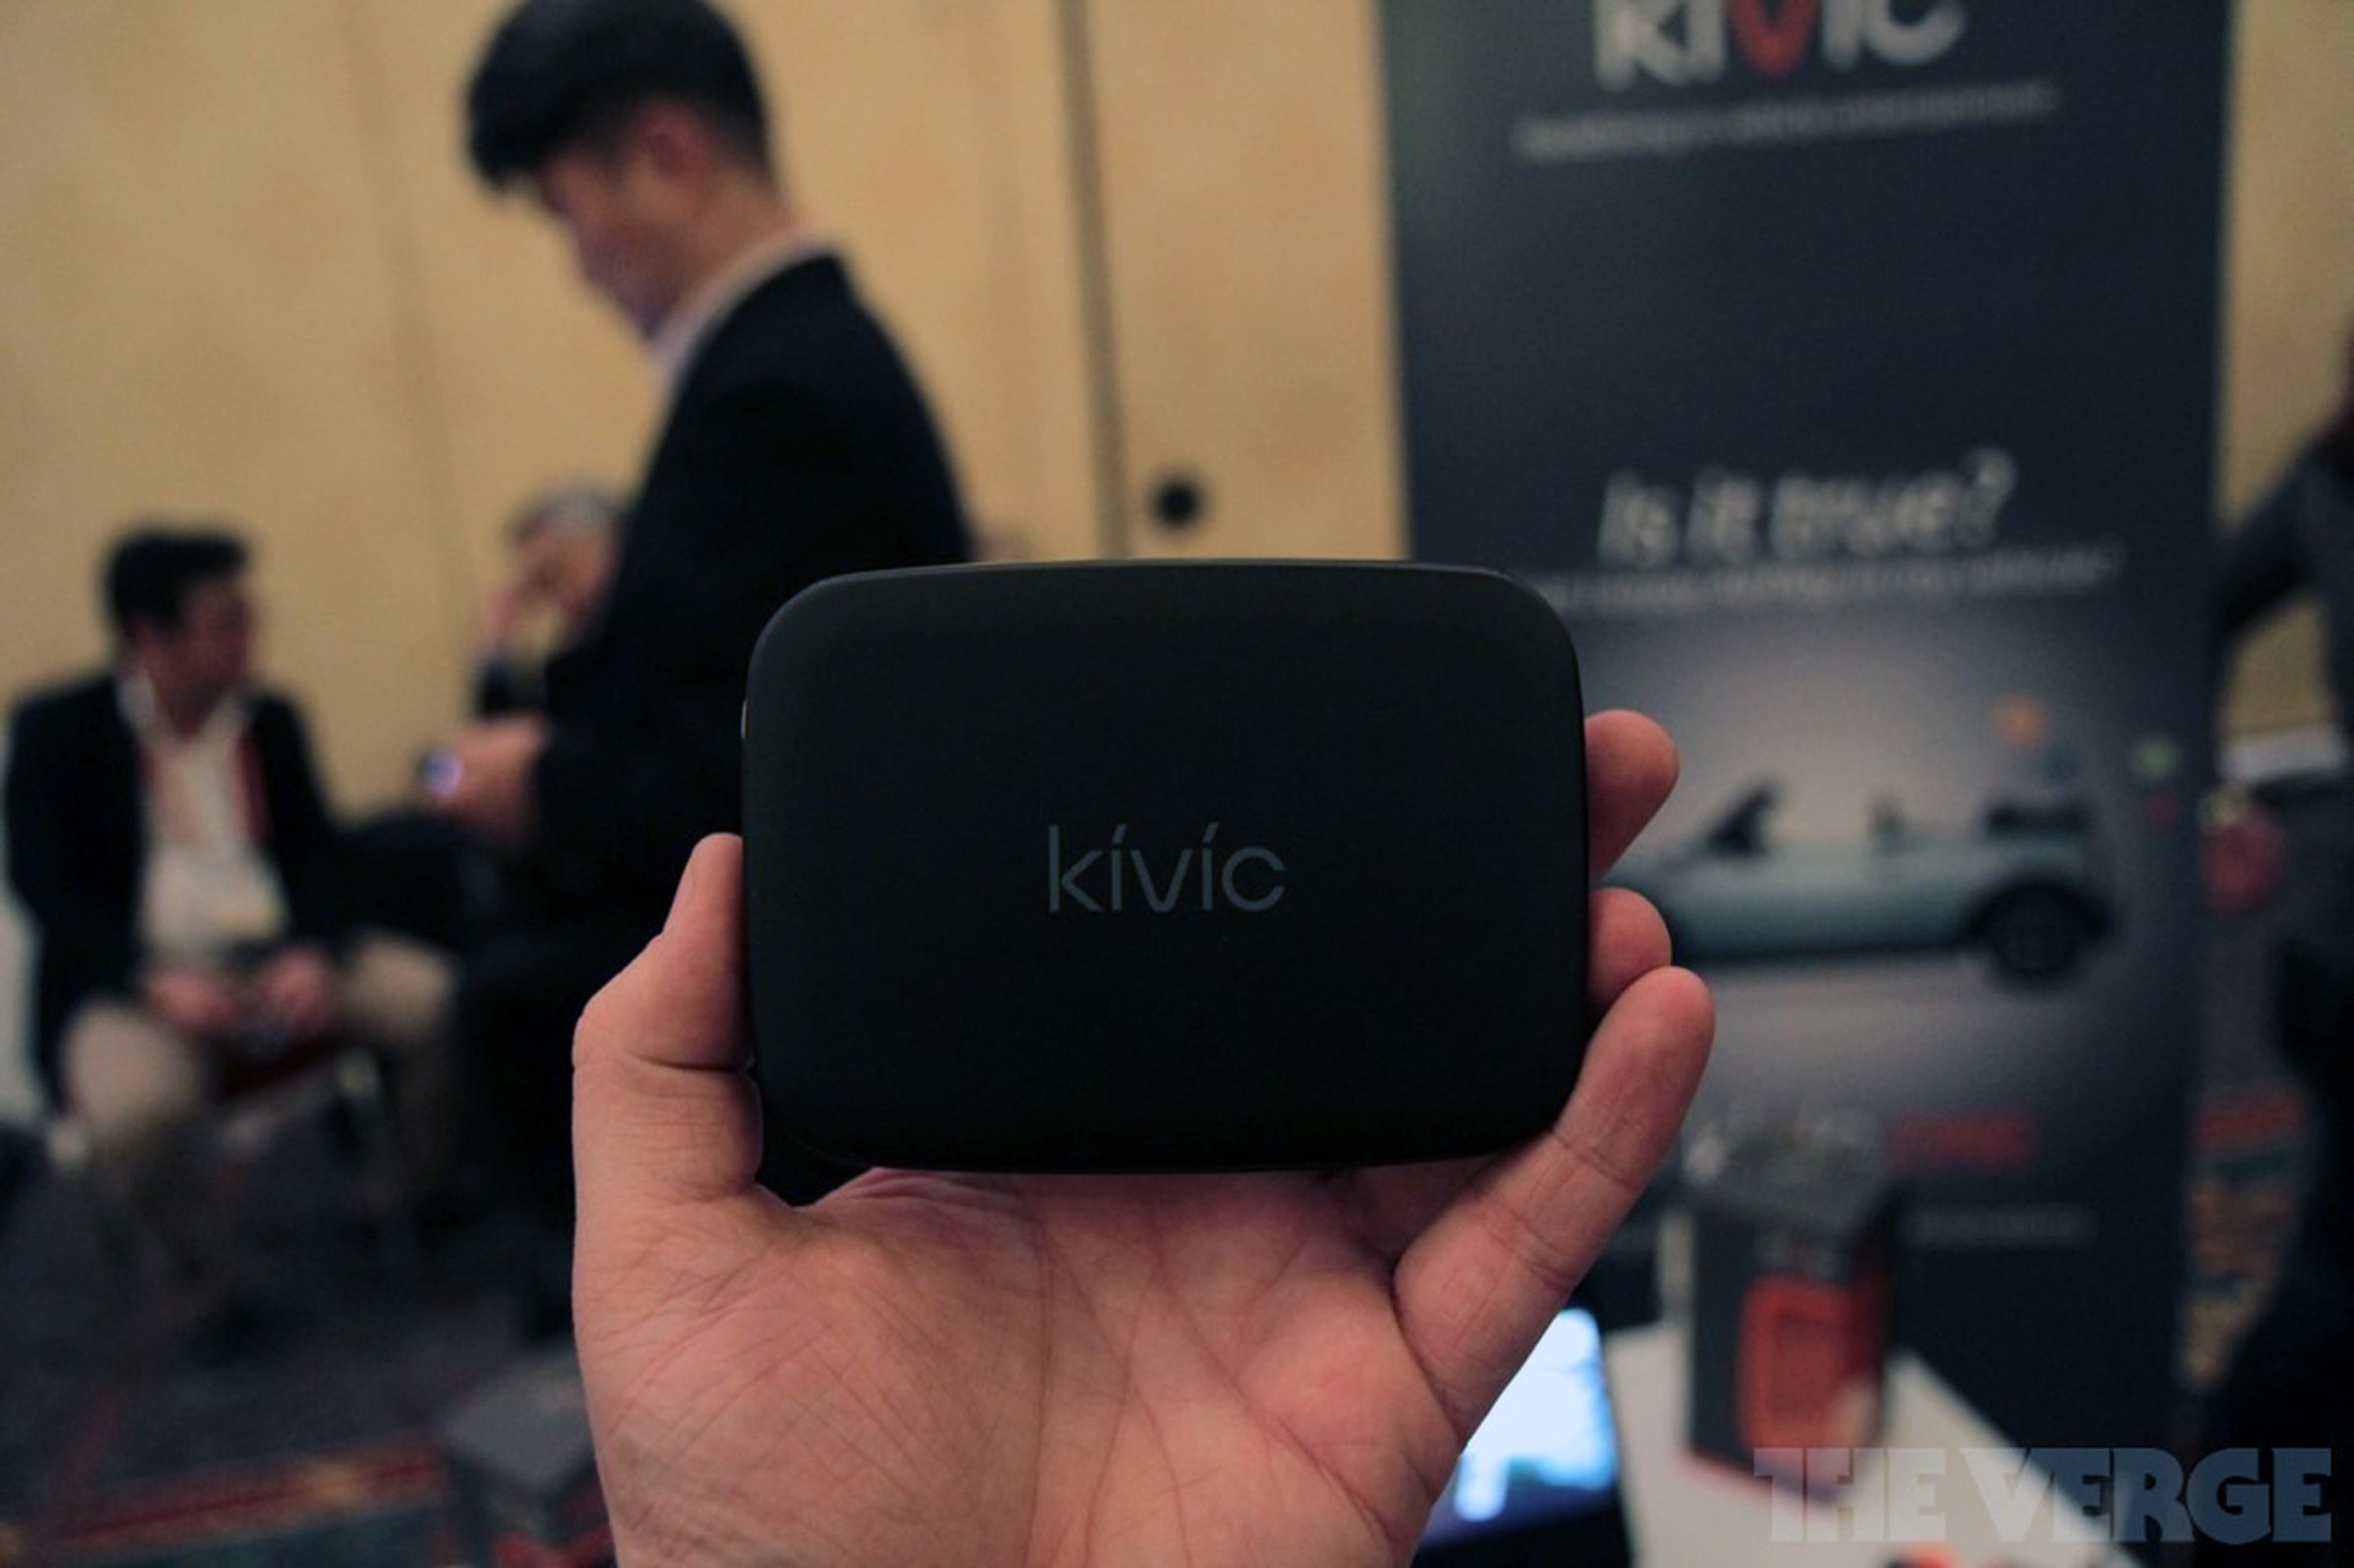 Kivic One hands-on